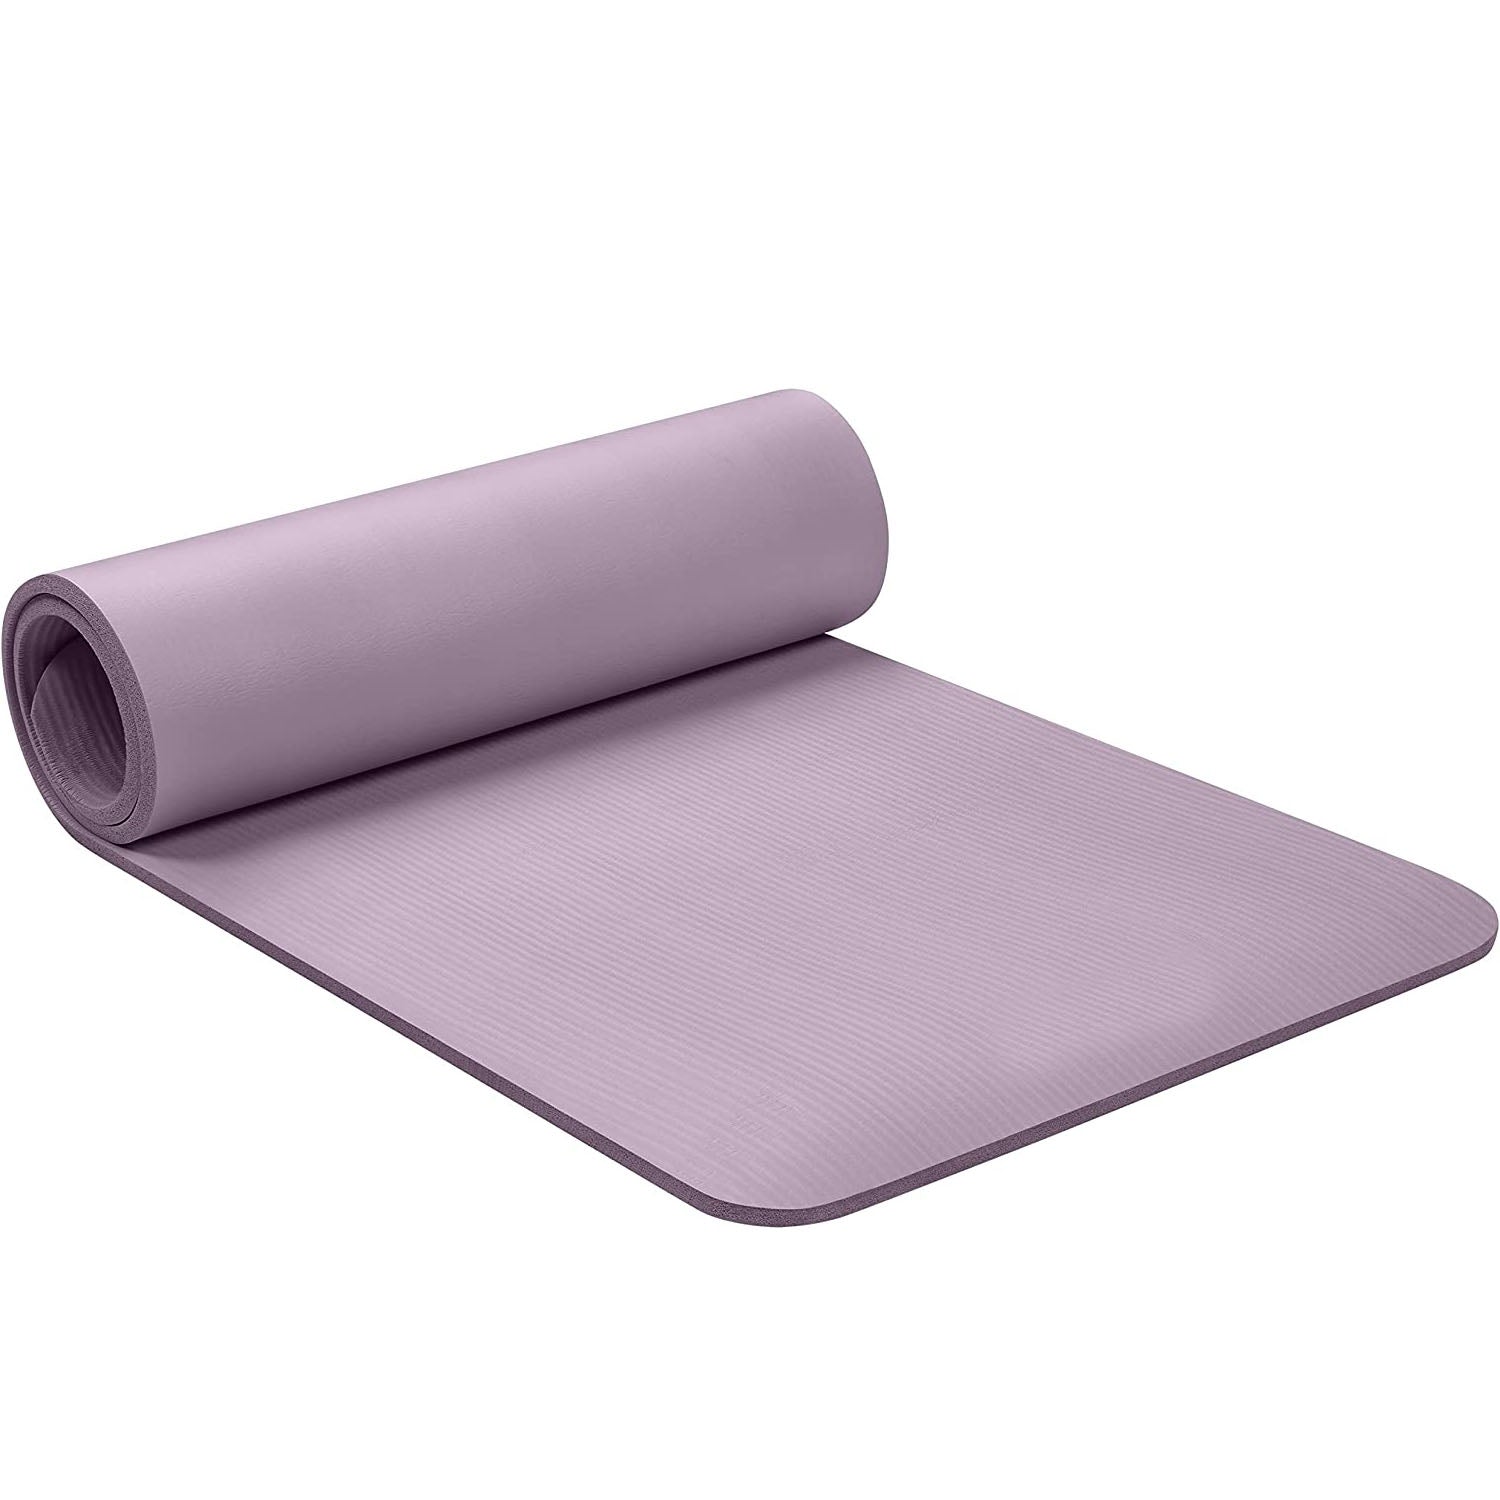 Stunner 15mm Yoga Mat, NBR Material with Carrying Strap, 15mm